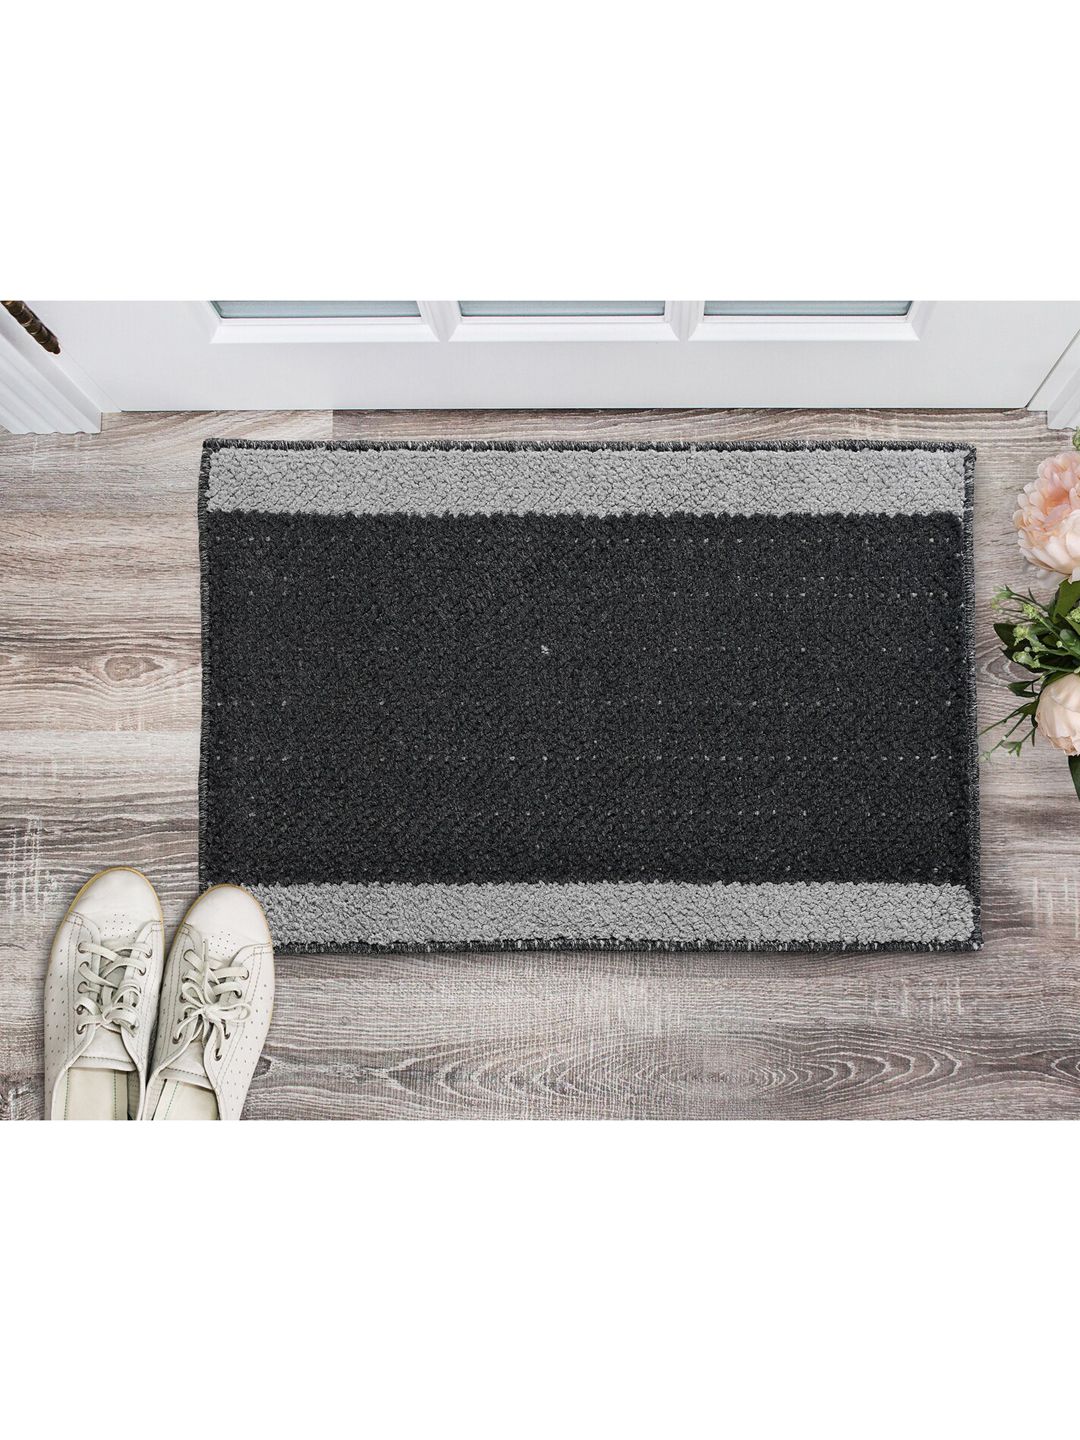 Saral Home Set Of 2 Solid Cotton Anti-Skid Door Mats Price in India